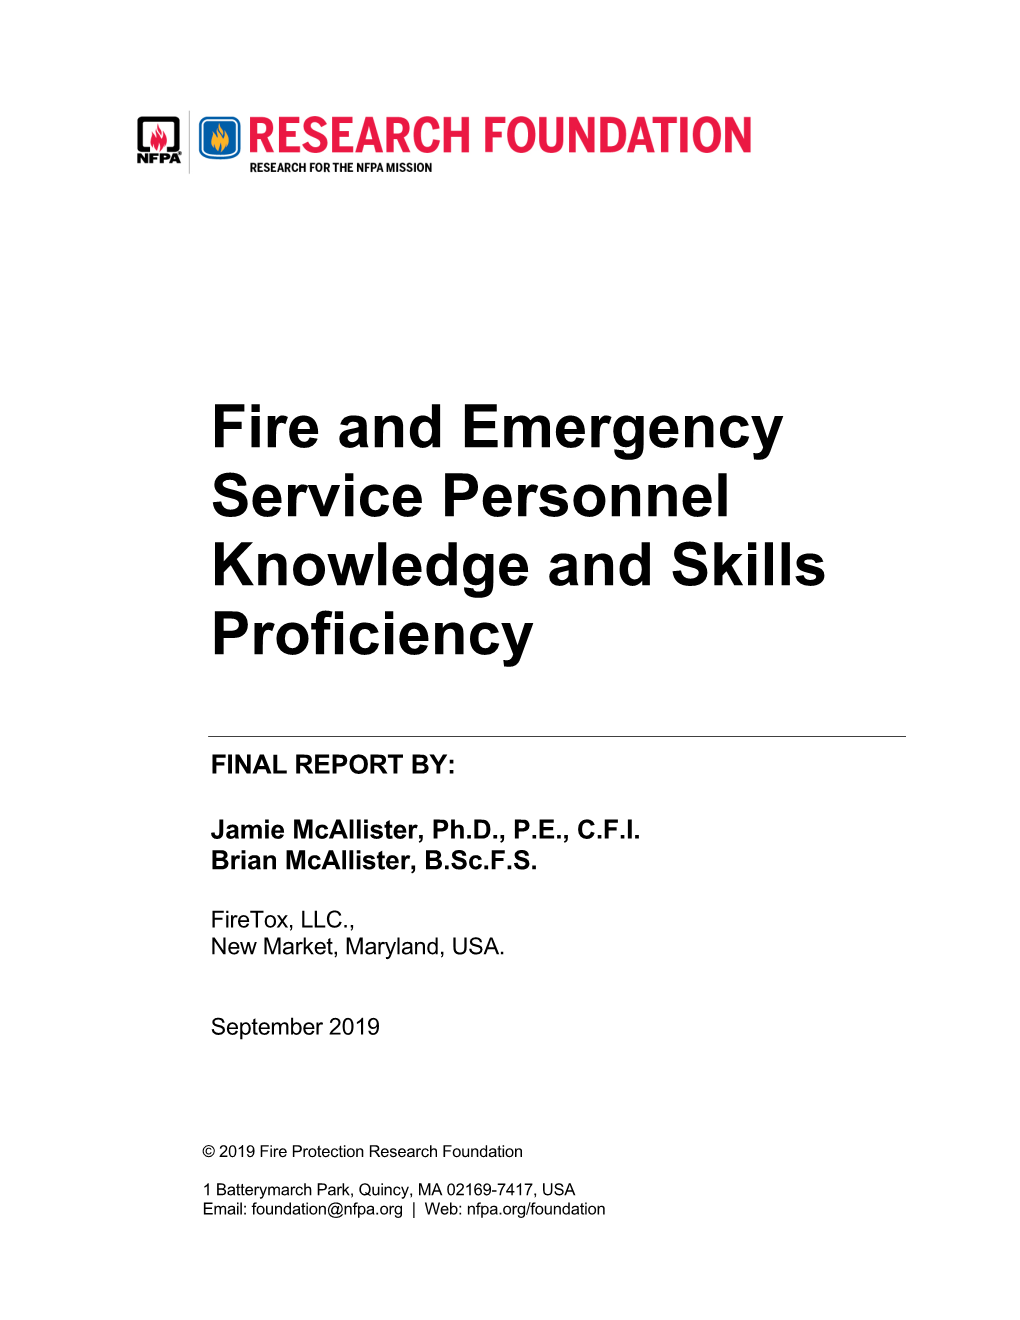 Fire and Emergency Service Personnel Knowledge and Skills Proficiency